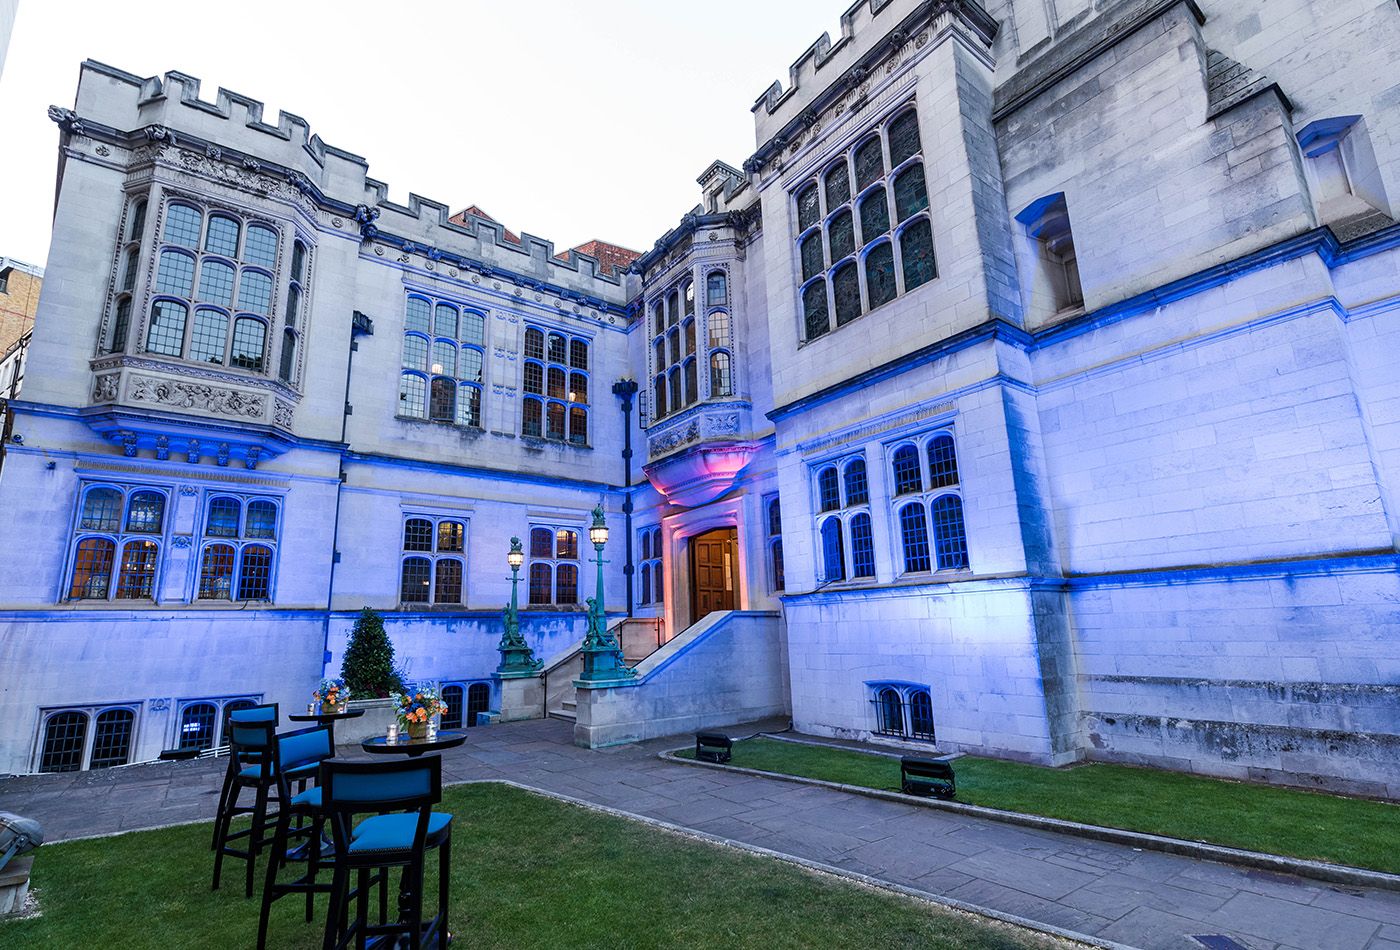 Neo-Gothic mansion lit up in blue